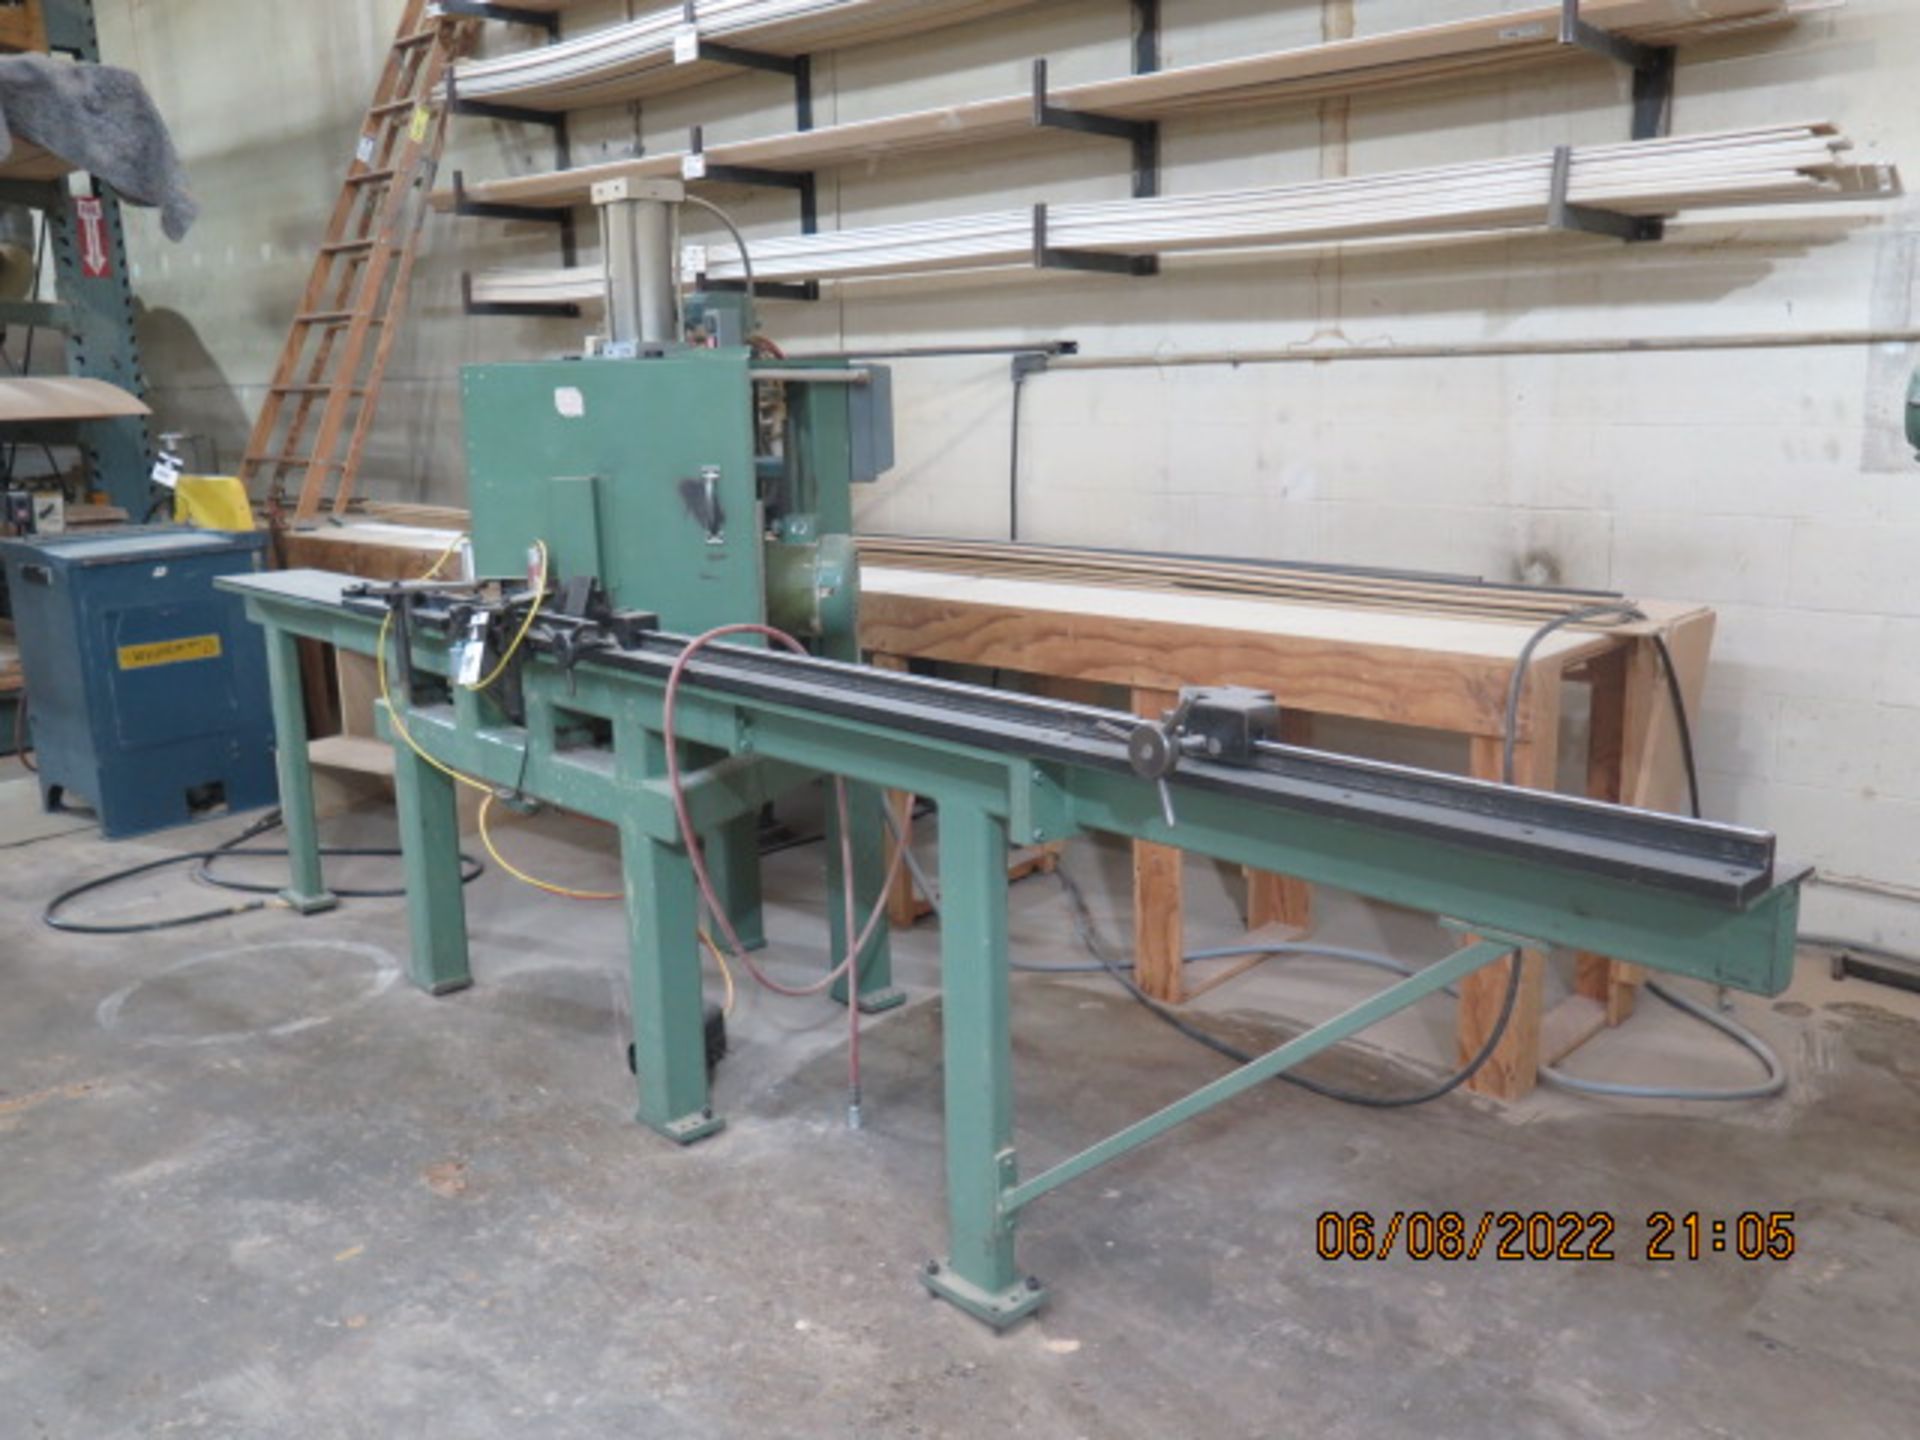 Cimmco DM100 Miter-Cut Saw s/n 8001 w/ Pneumatic Clamping and Feed, Fence System, SOLD AS IS - Image 2 of 10